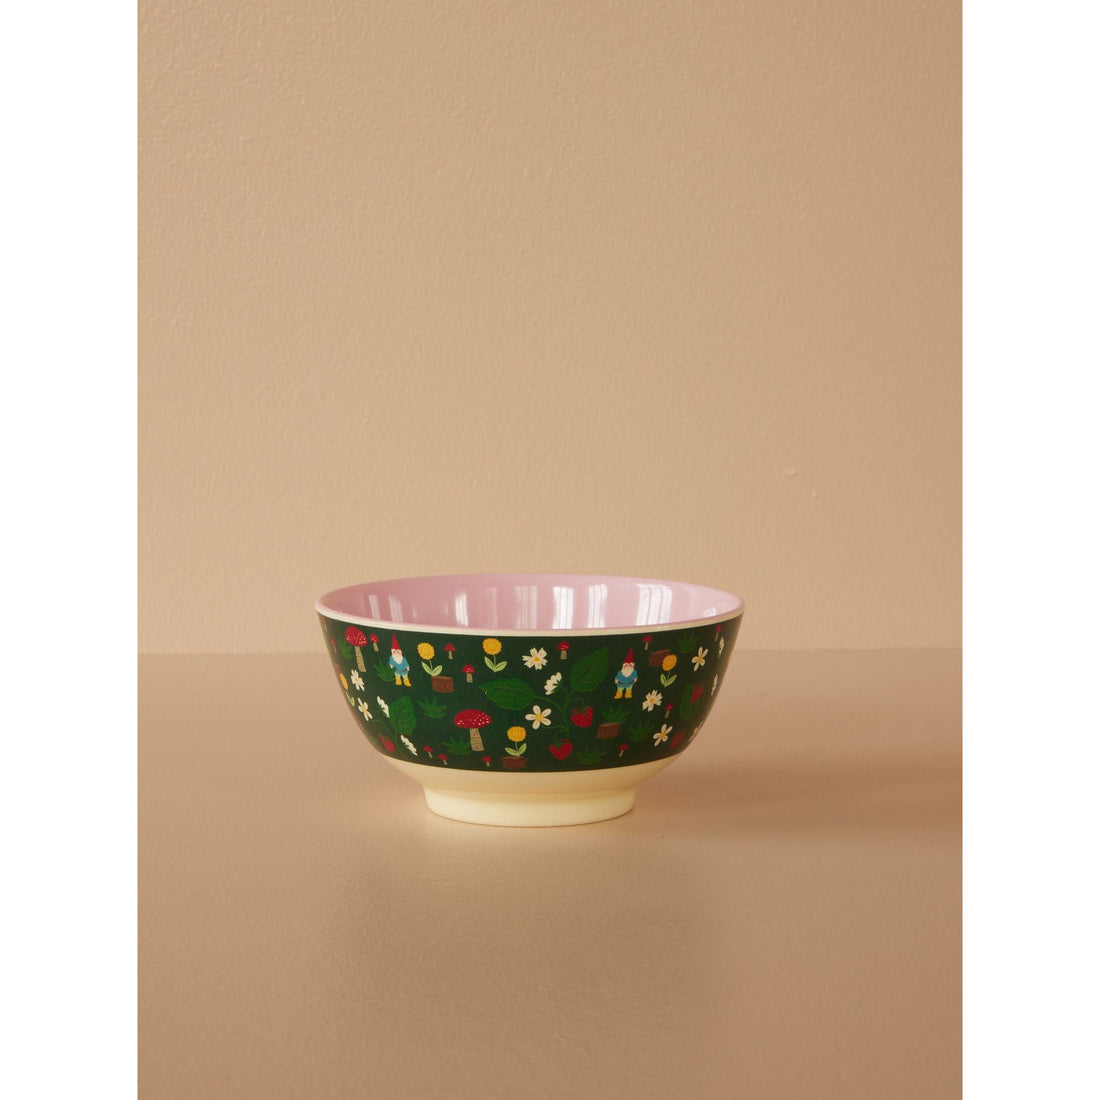 rice-dk-melamine-bowl-with-forest-gnome-print-medium-700-ml-rice-xmebw-for